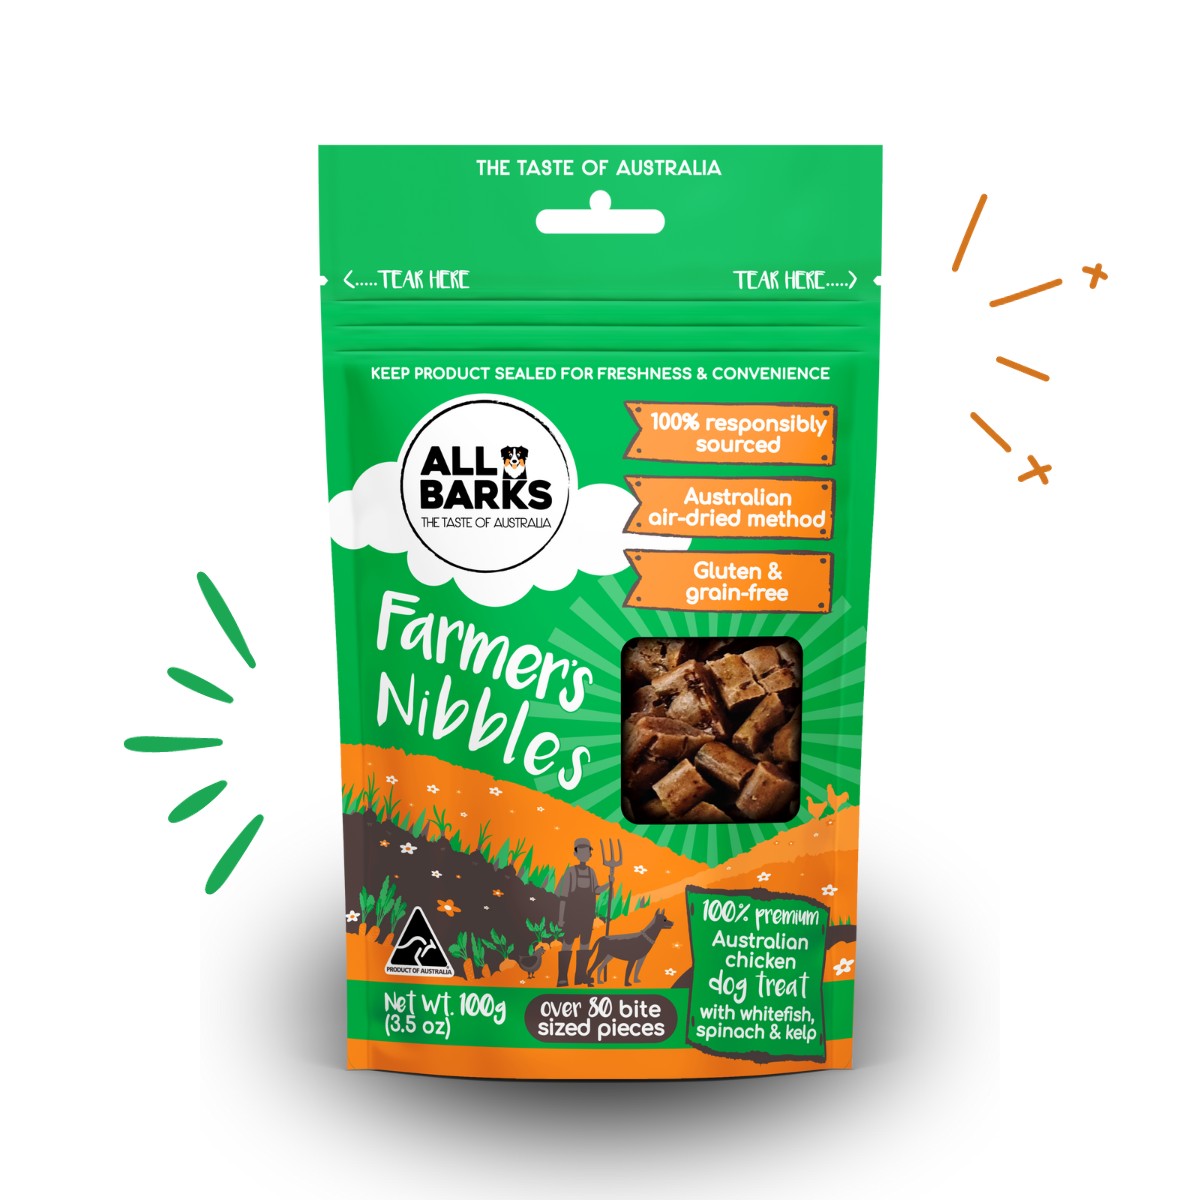 Chicken puppy treats by All Barks - Farmers Nibbles 